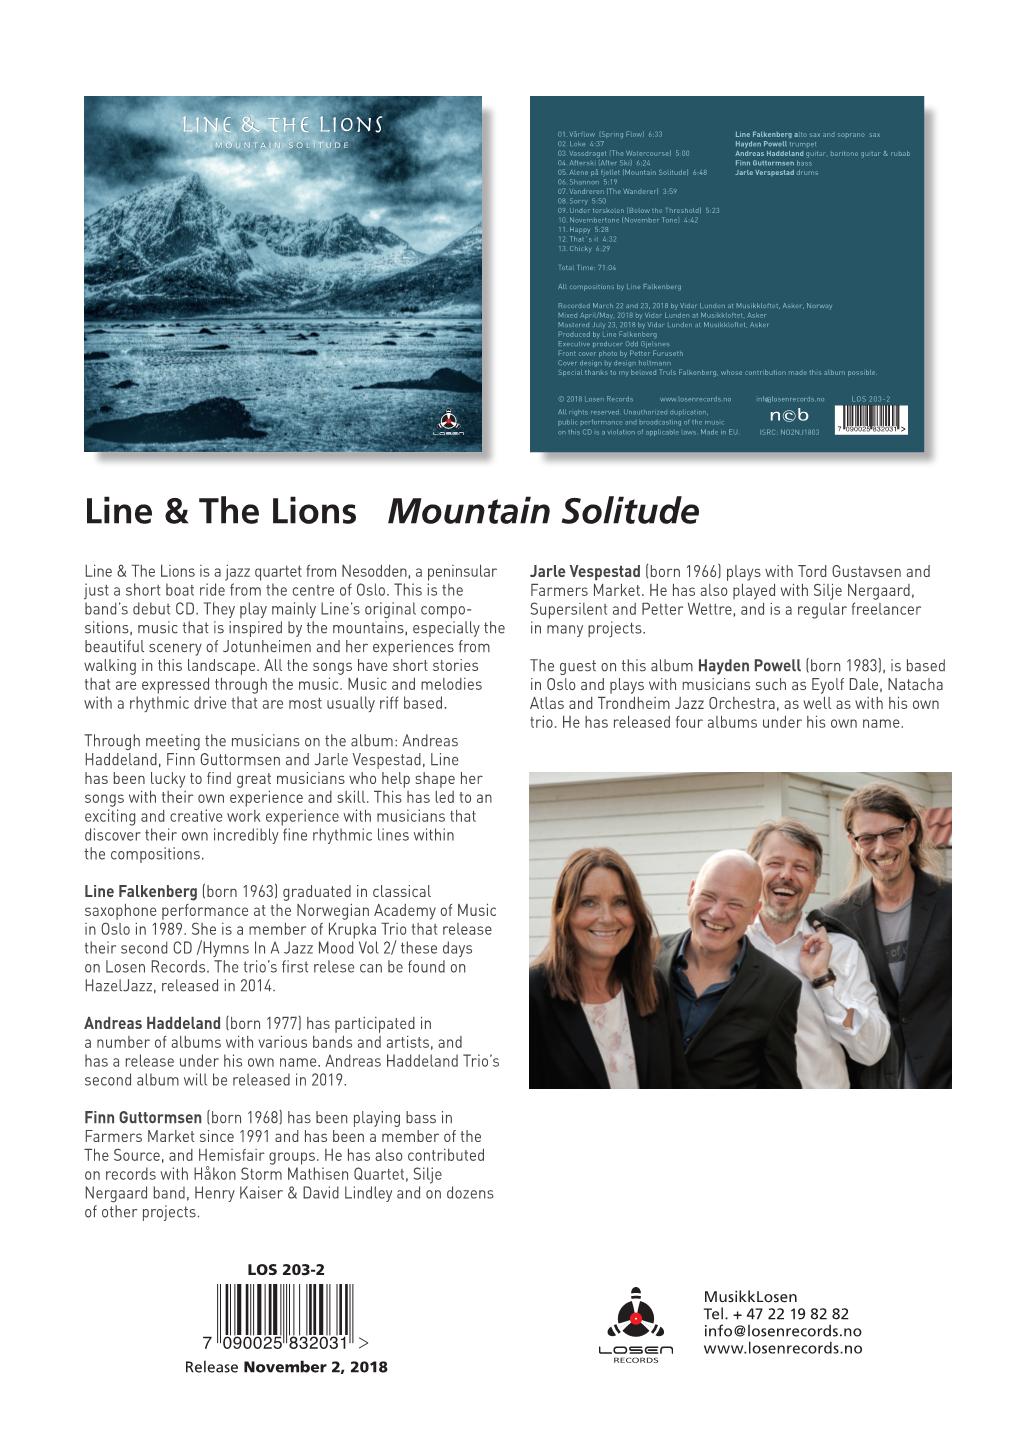 Line & the Lions Mountain Solitude